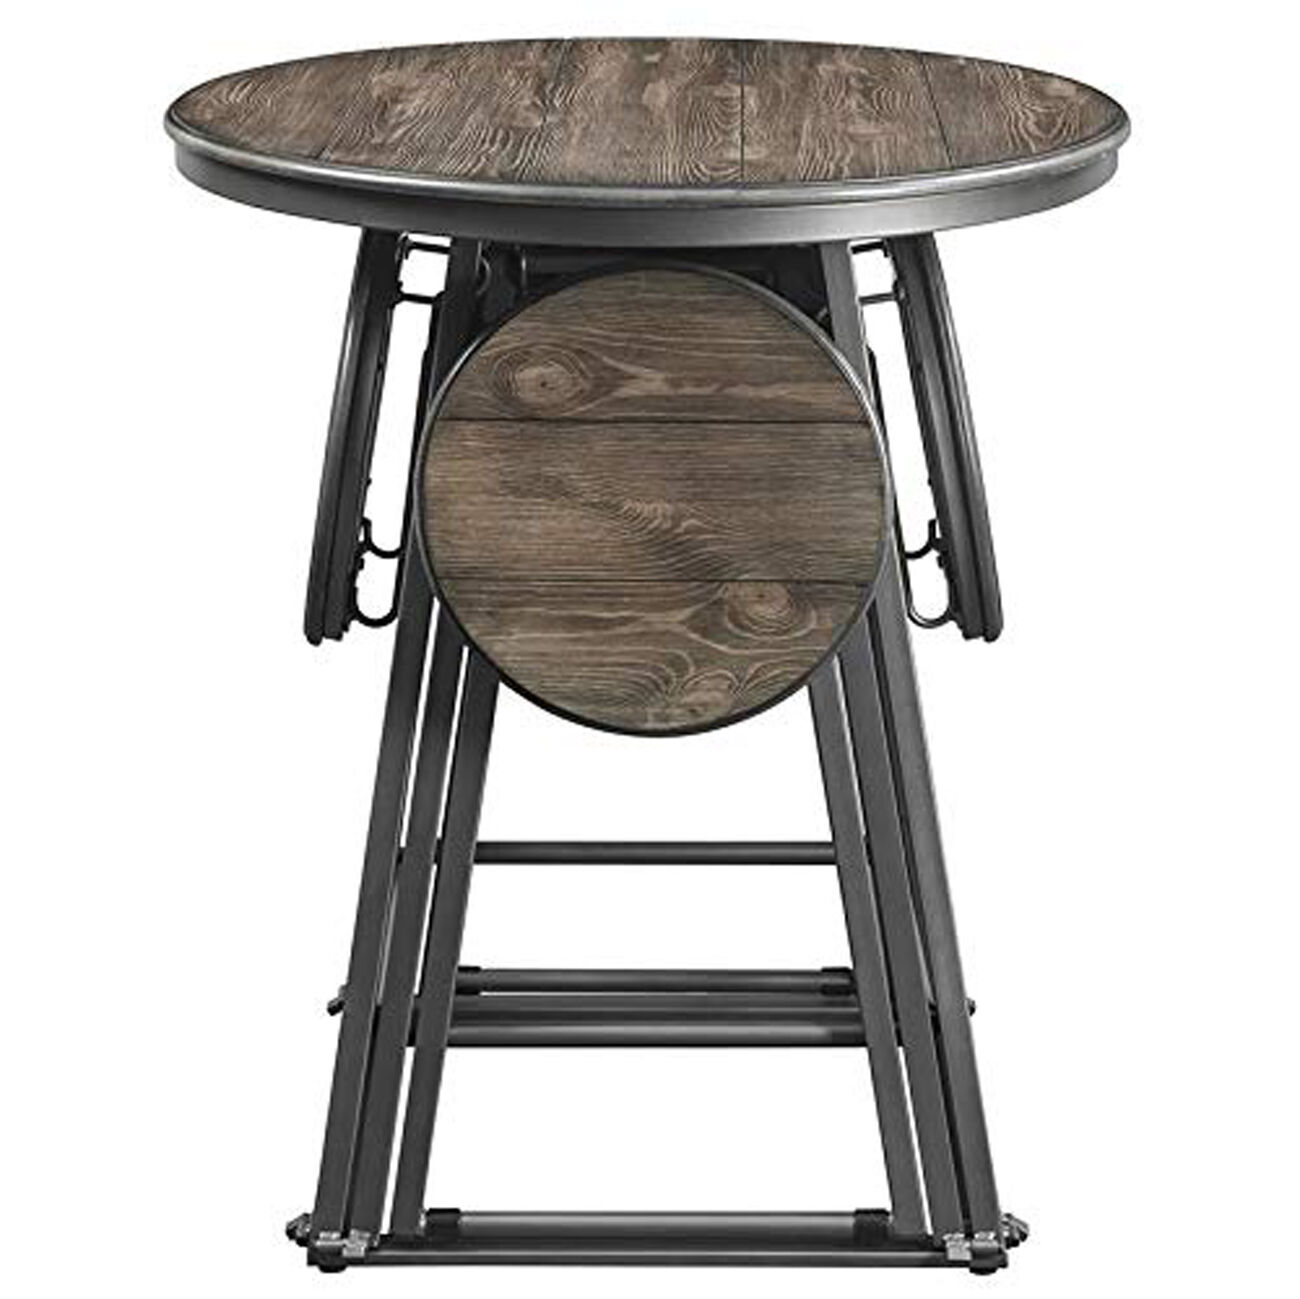 Wood and Metal Counter Height Table with Four Stools, Pack of 5, Gray and Brown